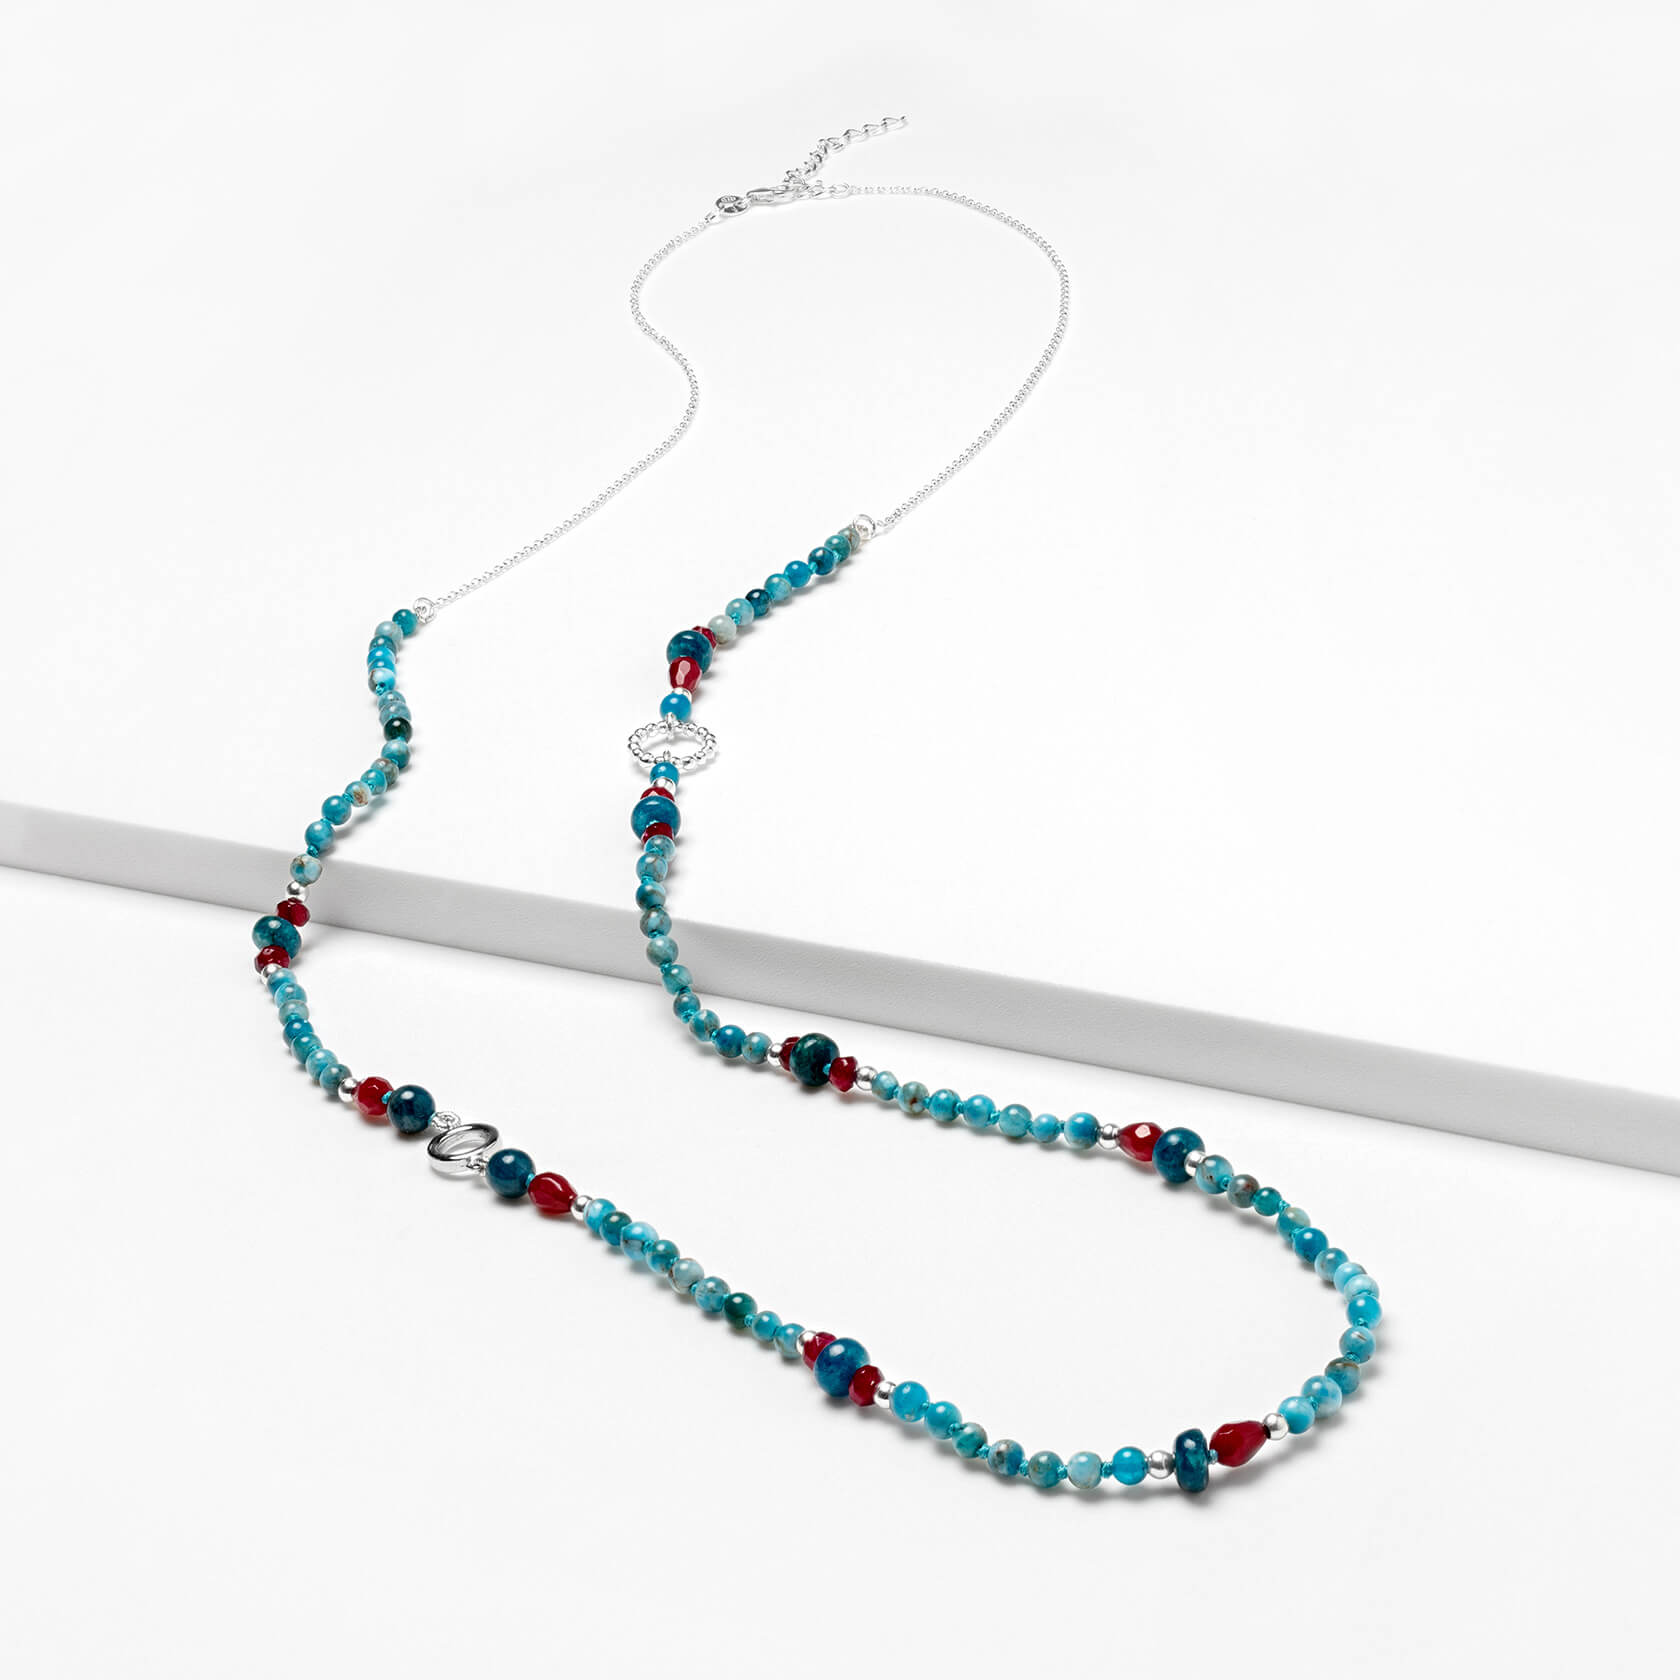 Apatite and agate necklace with chain